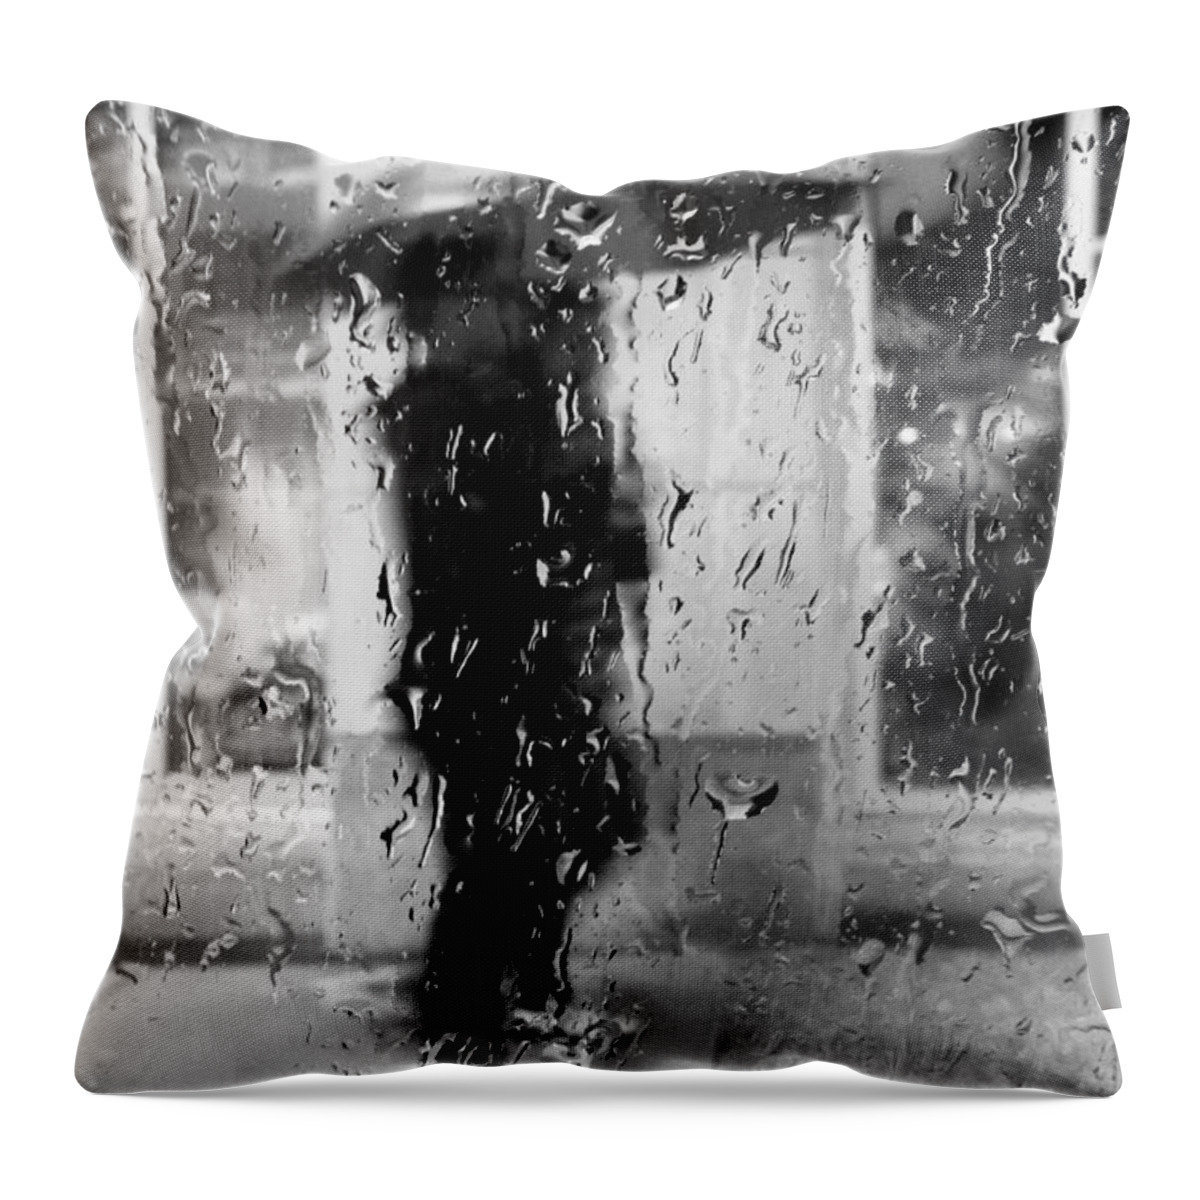 Rain Throw Pillow featuring the photograph My Damp Chances by J C